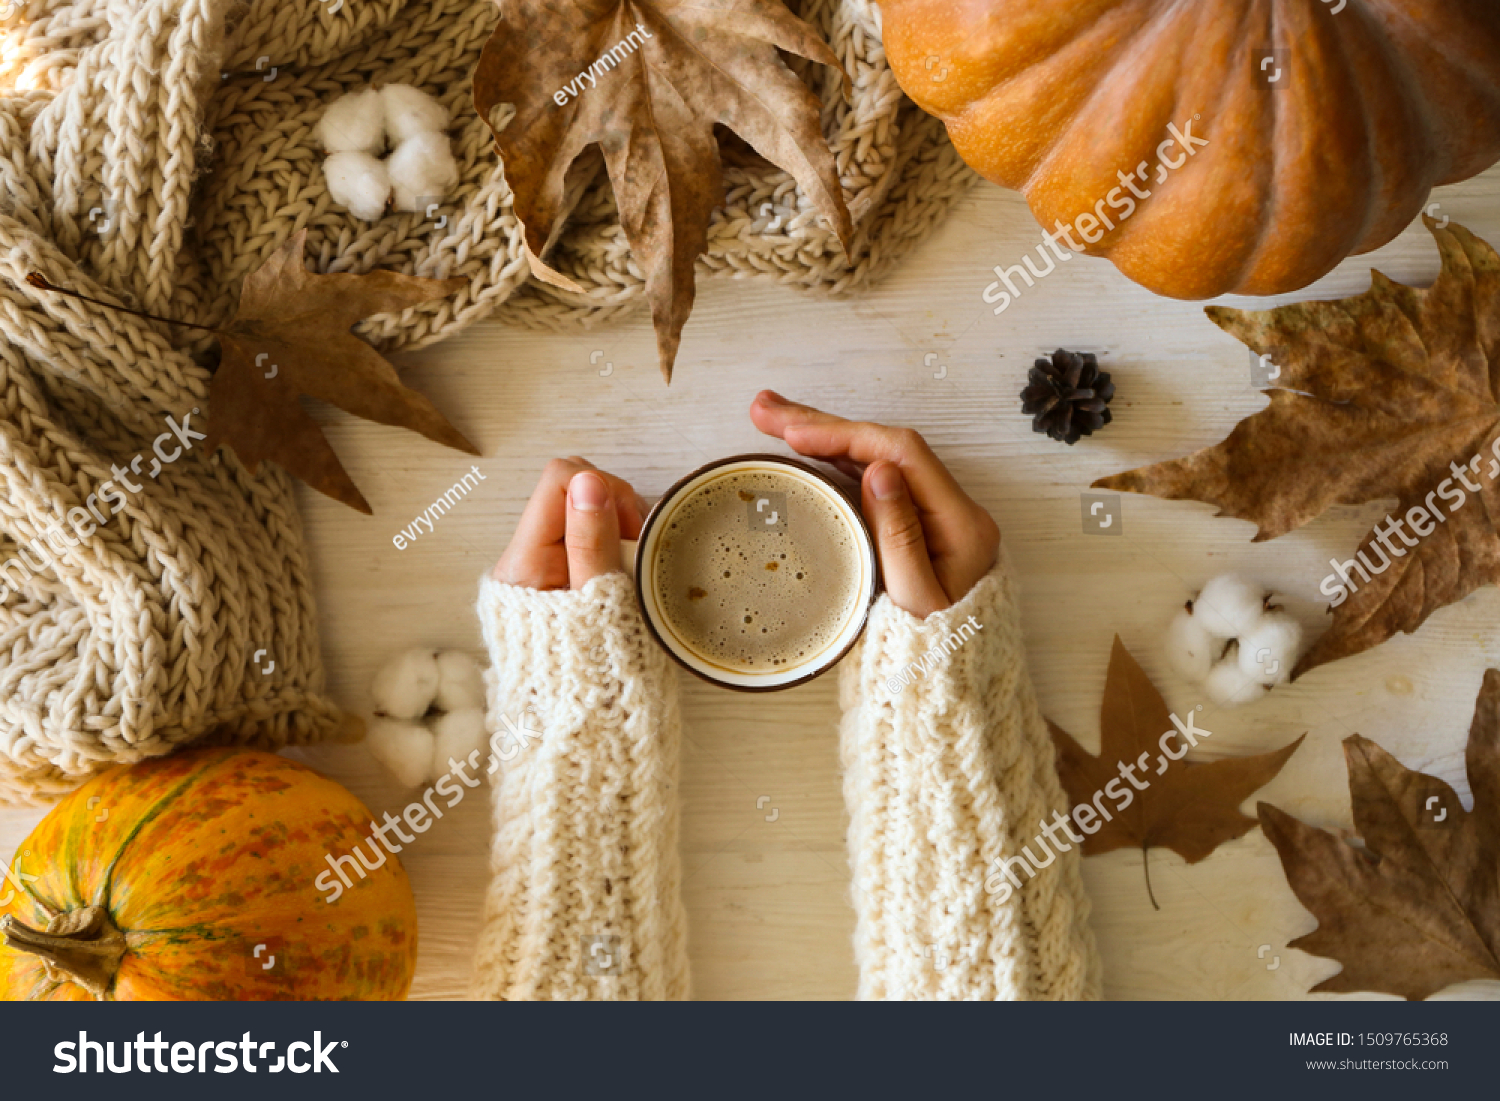 Top view composition with young woman's hands in white sweater, vintage styled cup of coffee and autumn themed decoration, fallen leaves on textured background. Flat lay, copy space. #1509765368